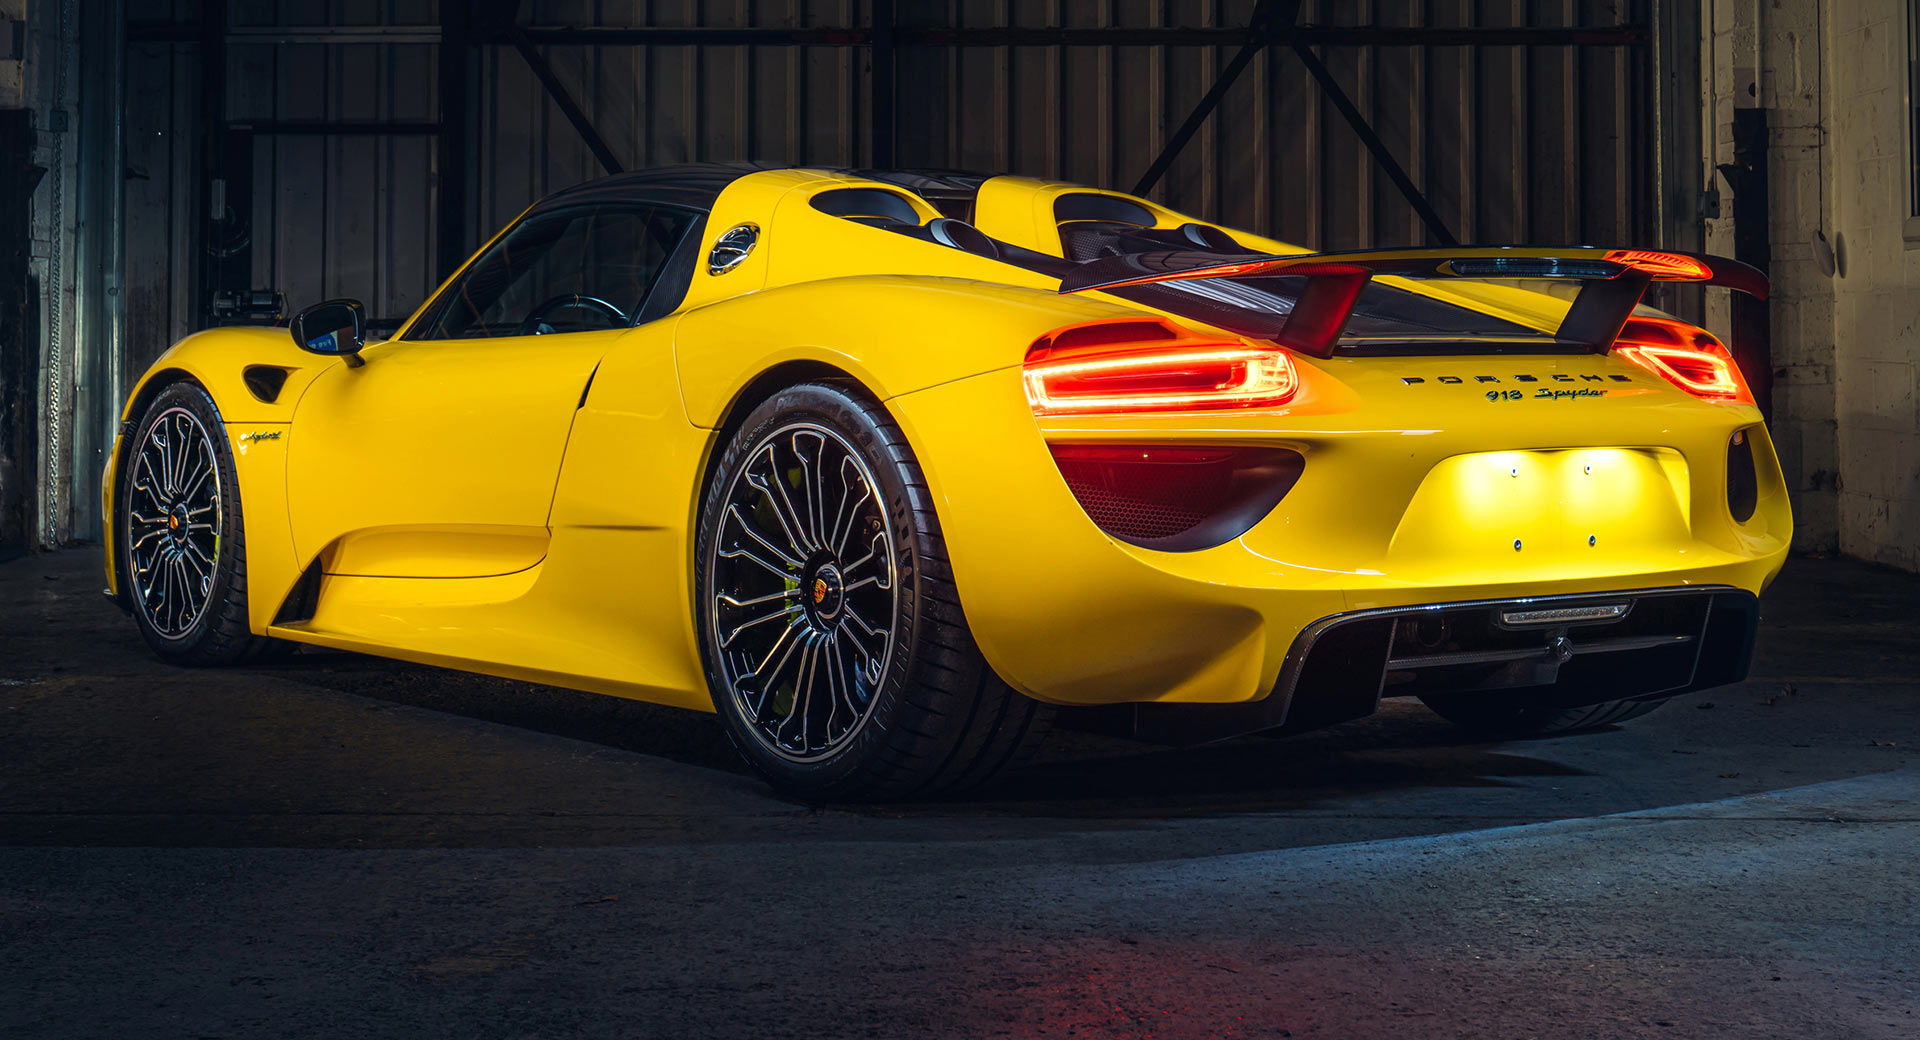 This Yellow Porsche 918 Spyder Has A $1.2 Million Asking Price | Carscoops